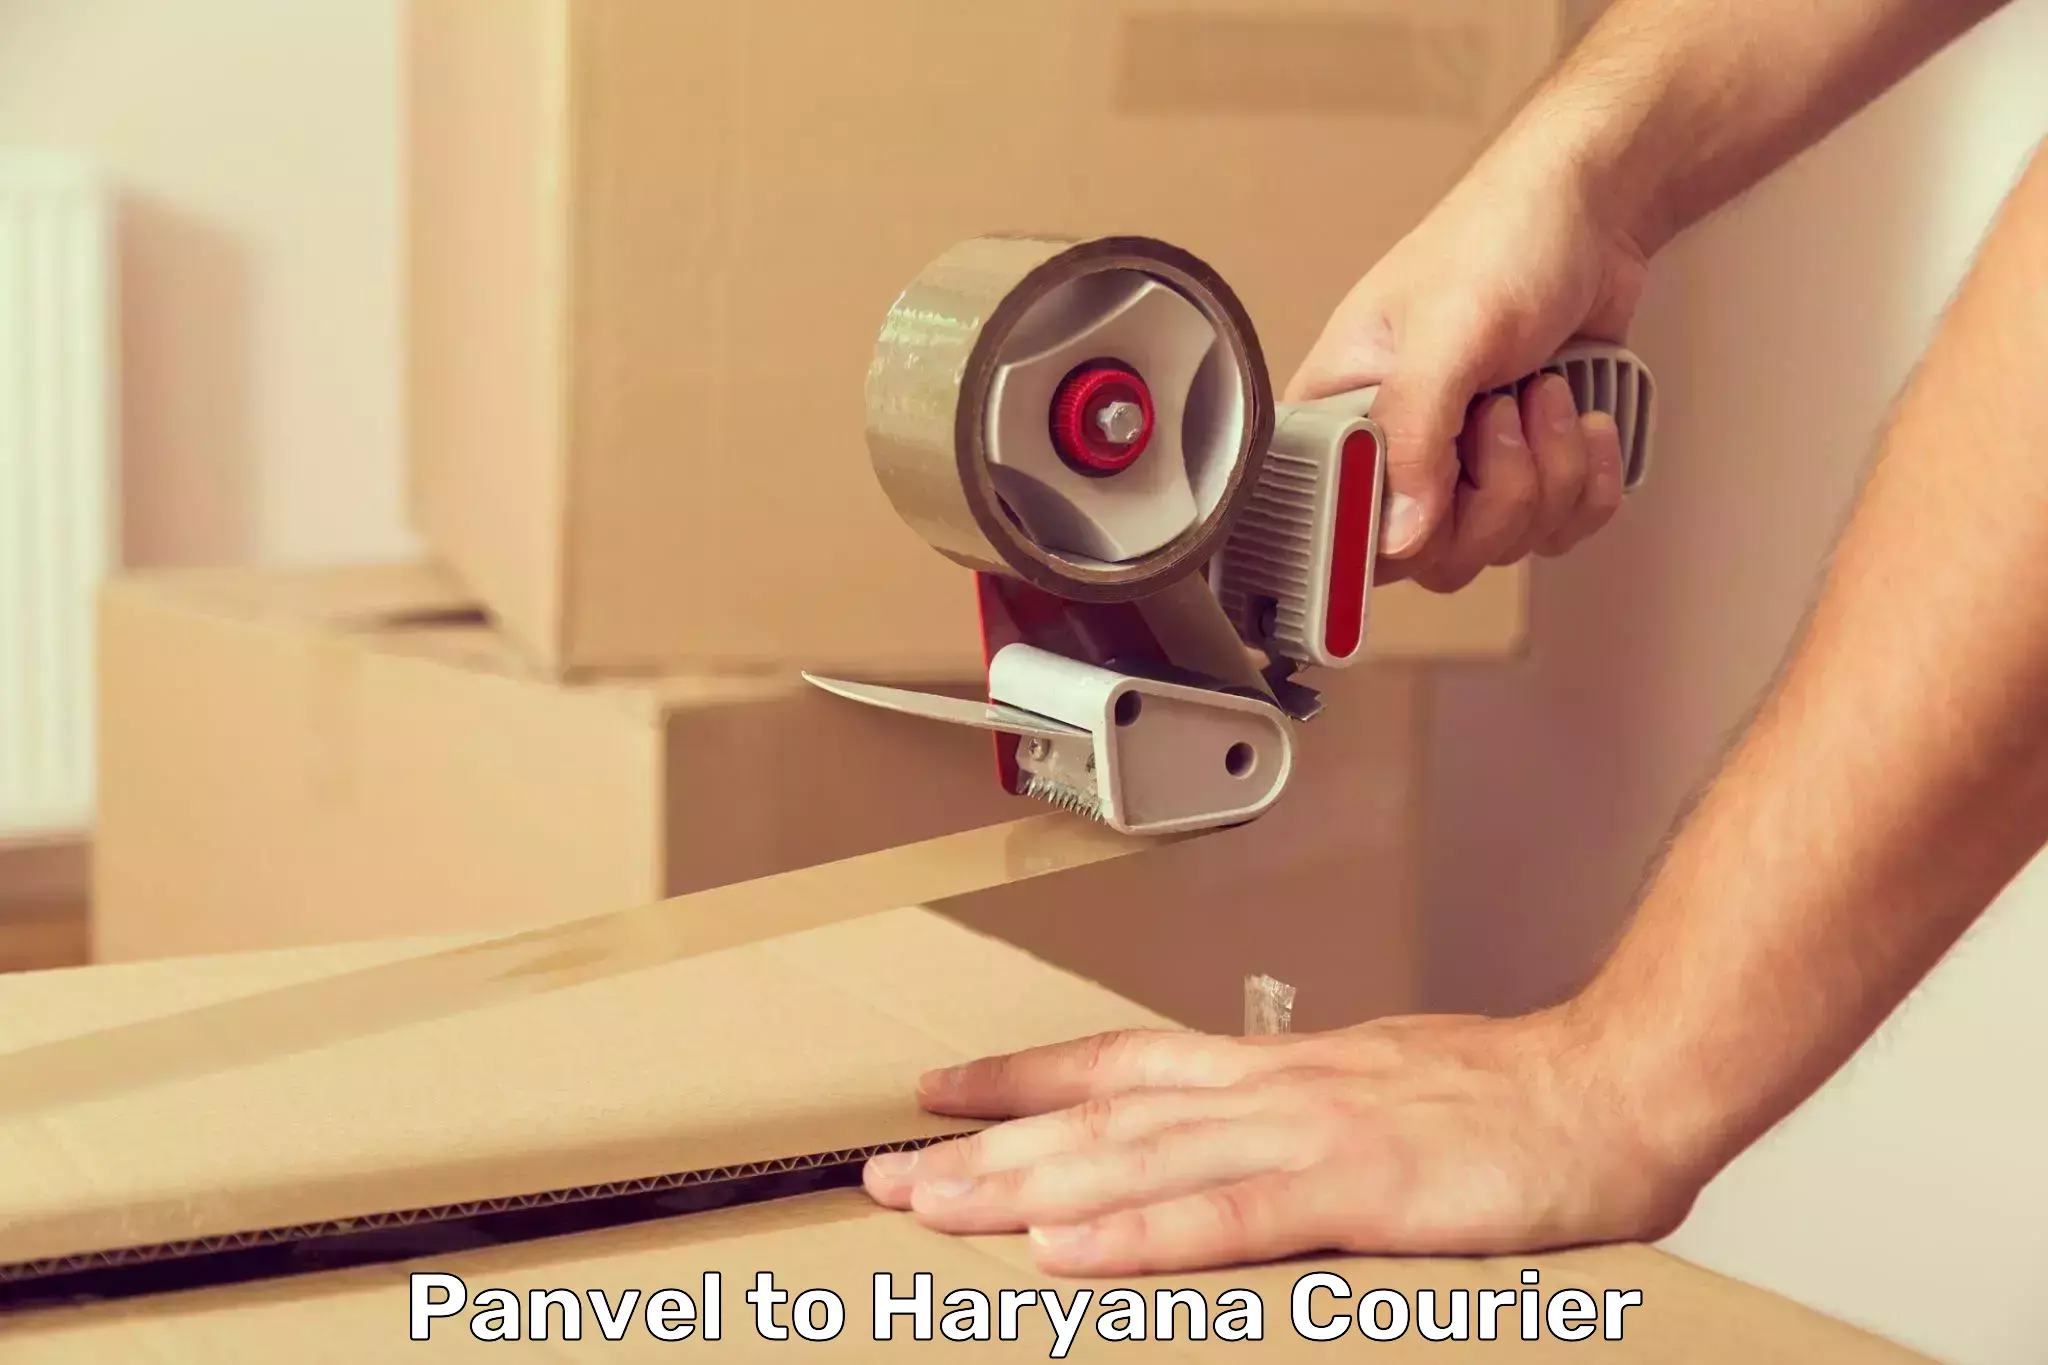 Quality courier services Panvel to NCR Haryana